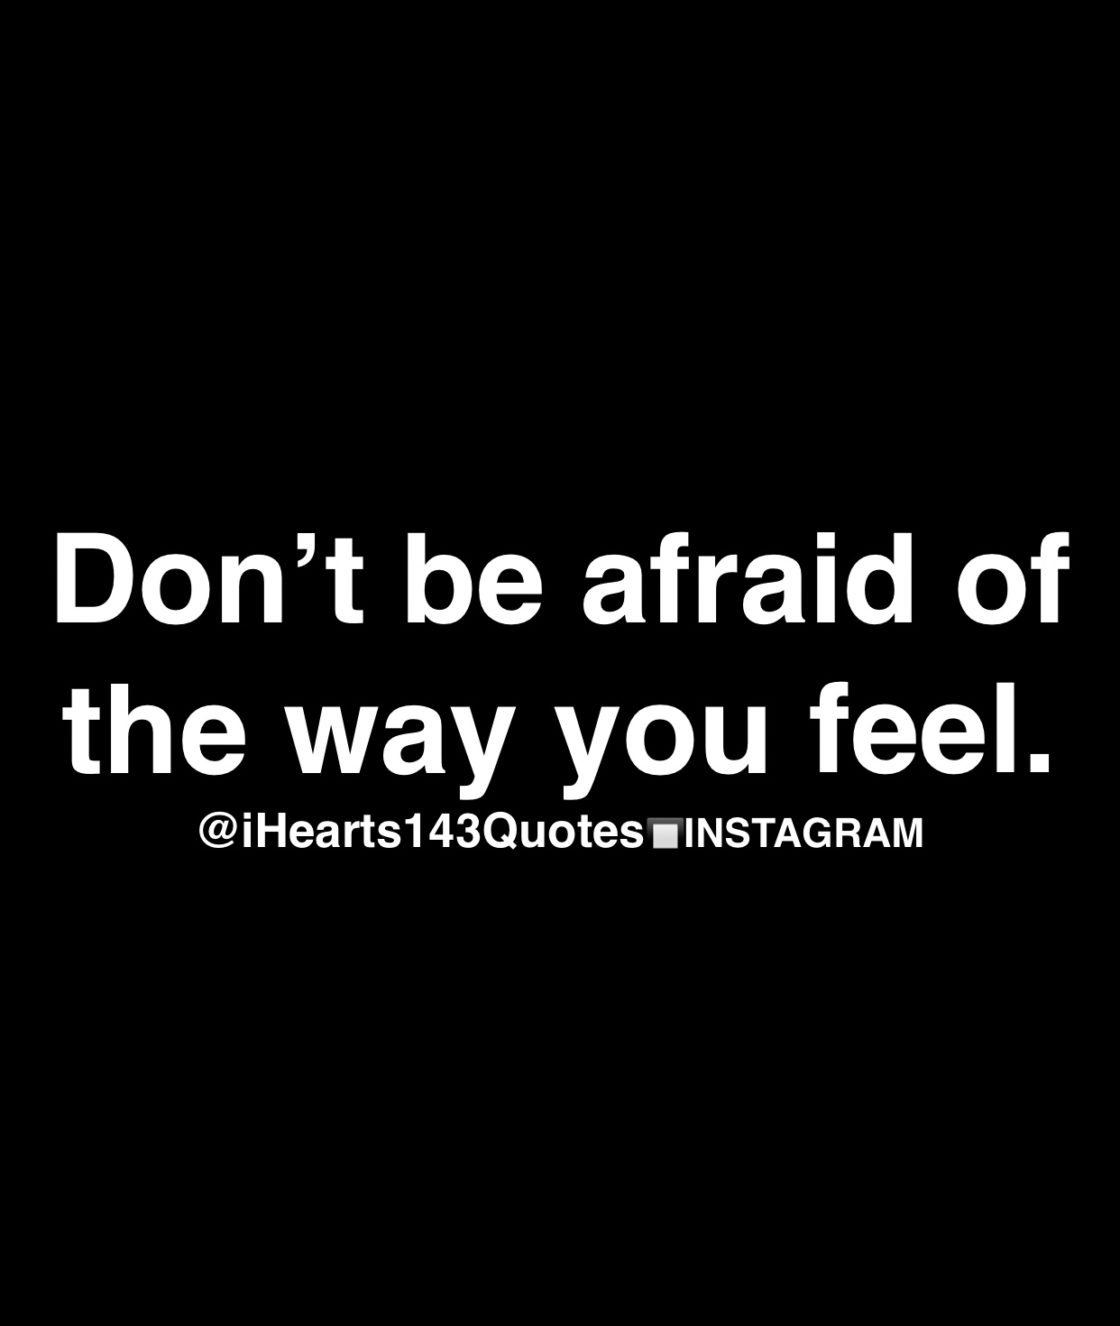 Image result for “Don’t be afraid of the way you feel!”